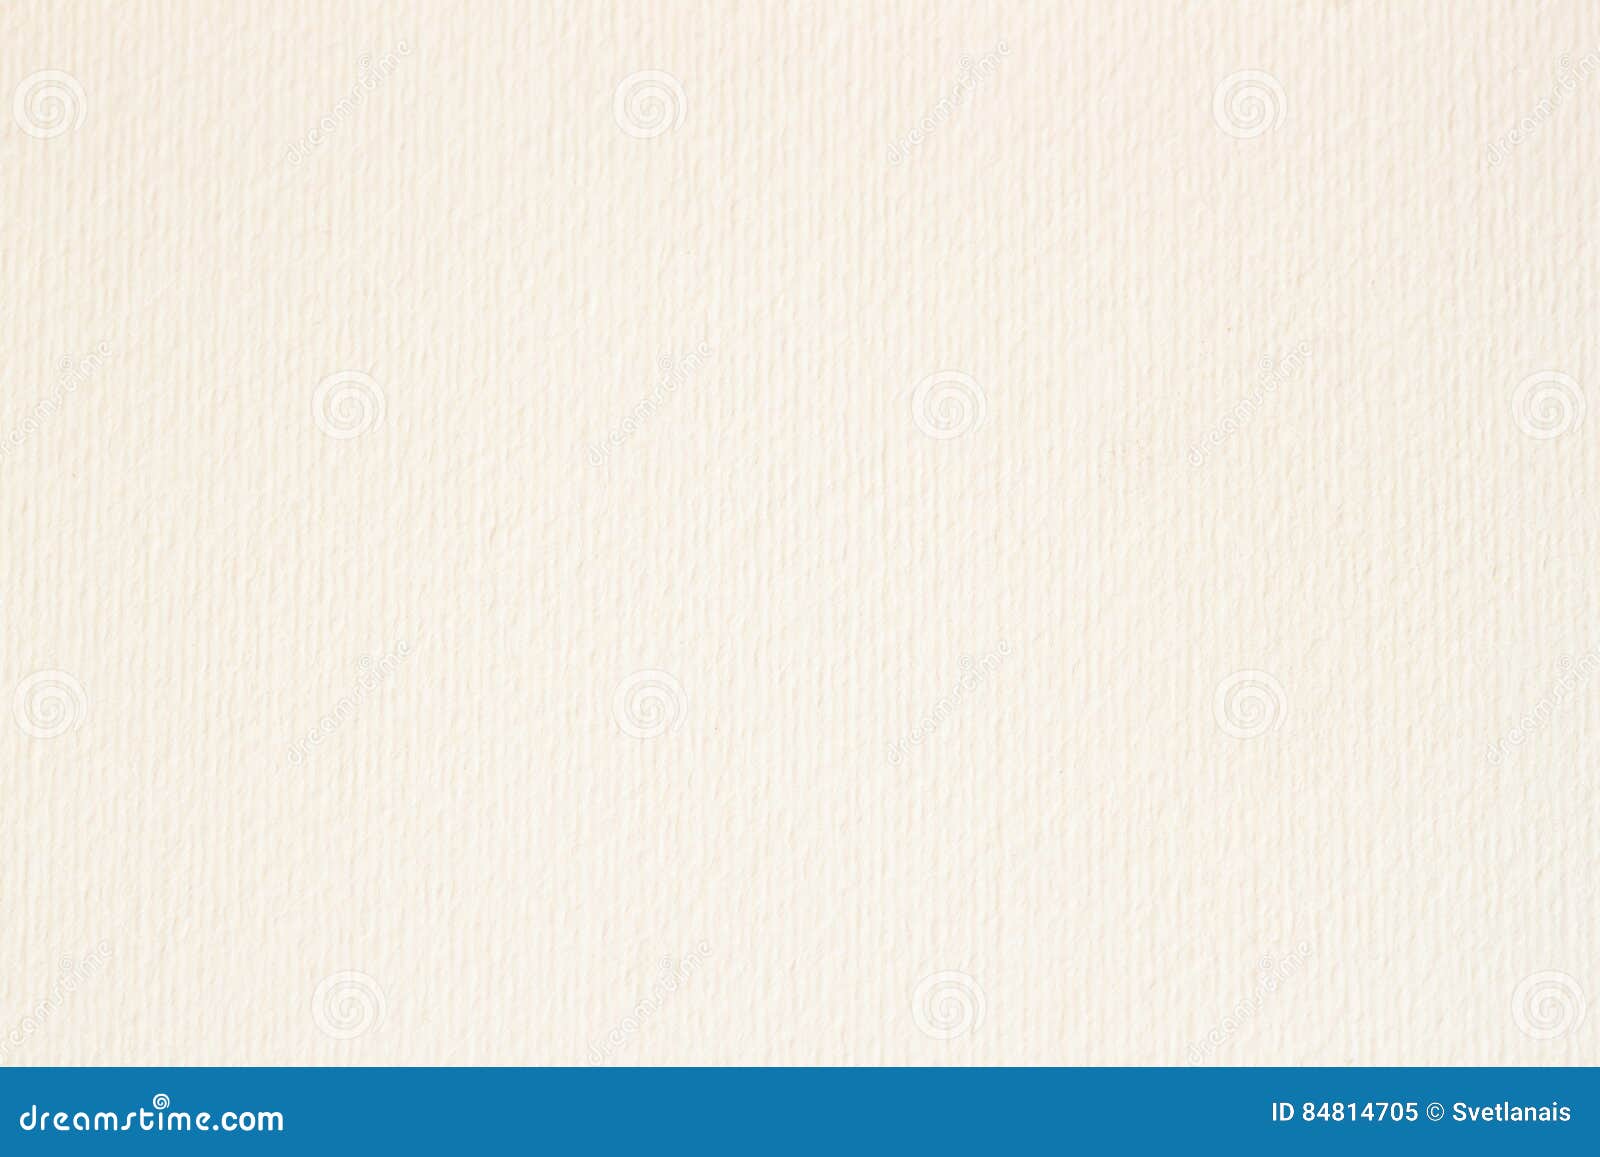 Texture of Light Cream Paper, Background for Design with Copy Space Text or  Image. Stock Image - Image of fiber, canvas: 84814705